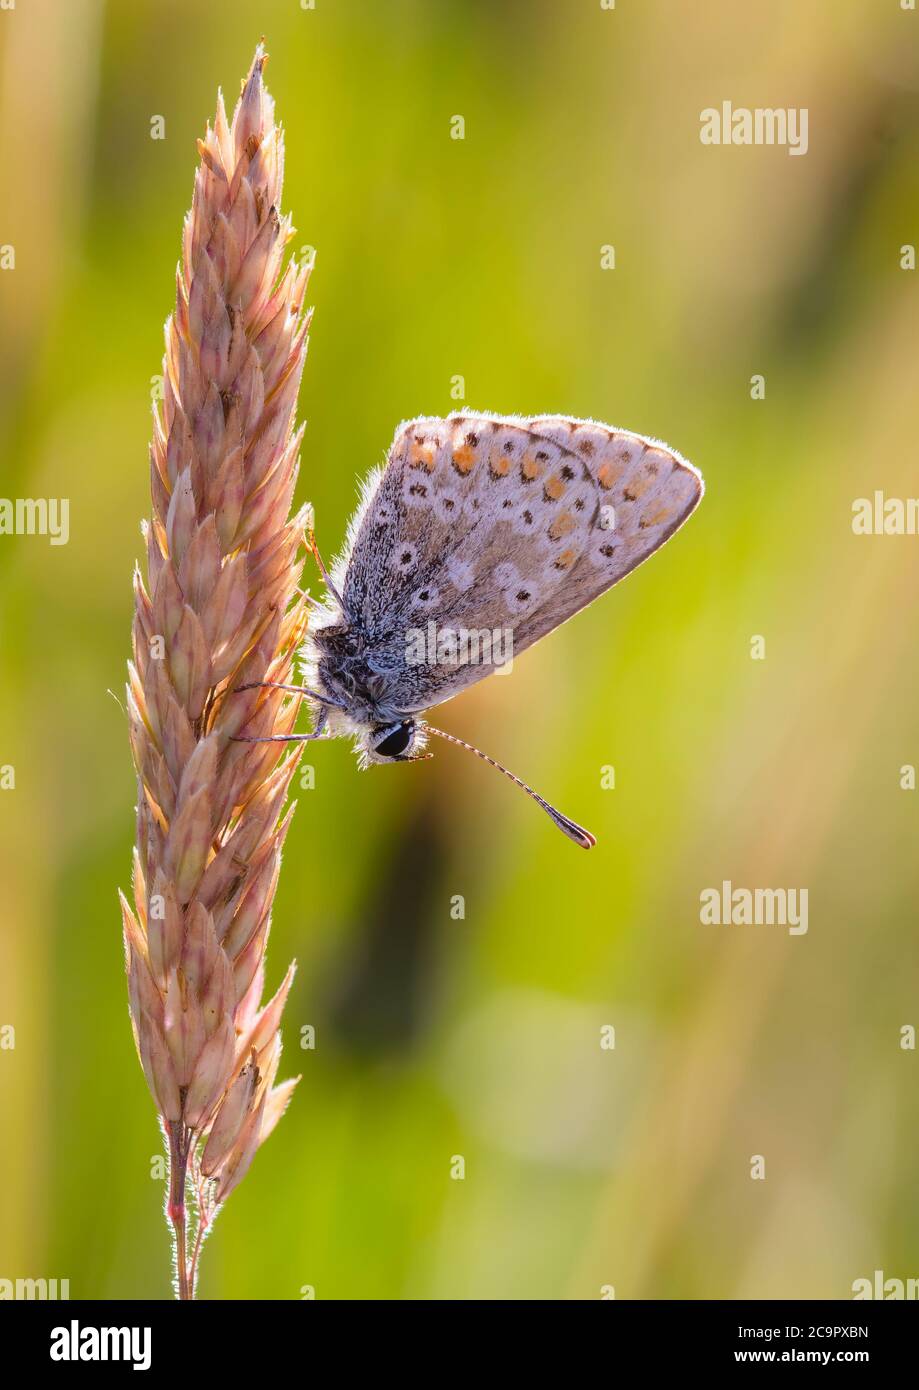 A beautiful Brown Argus butterfly resting o a head of grass seeds. Stock Photo